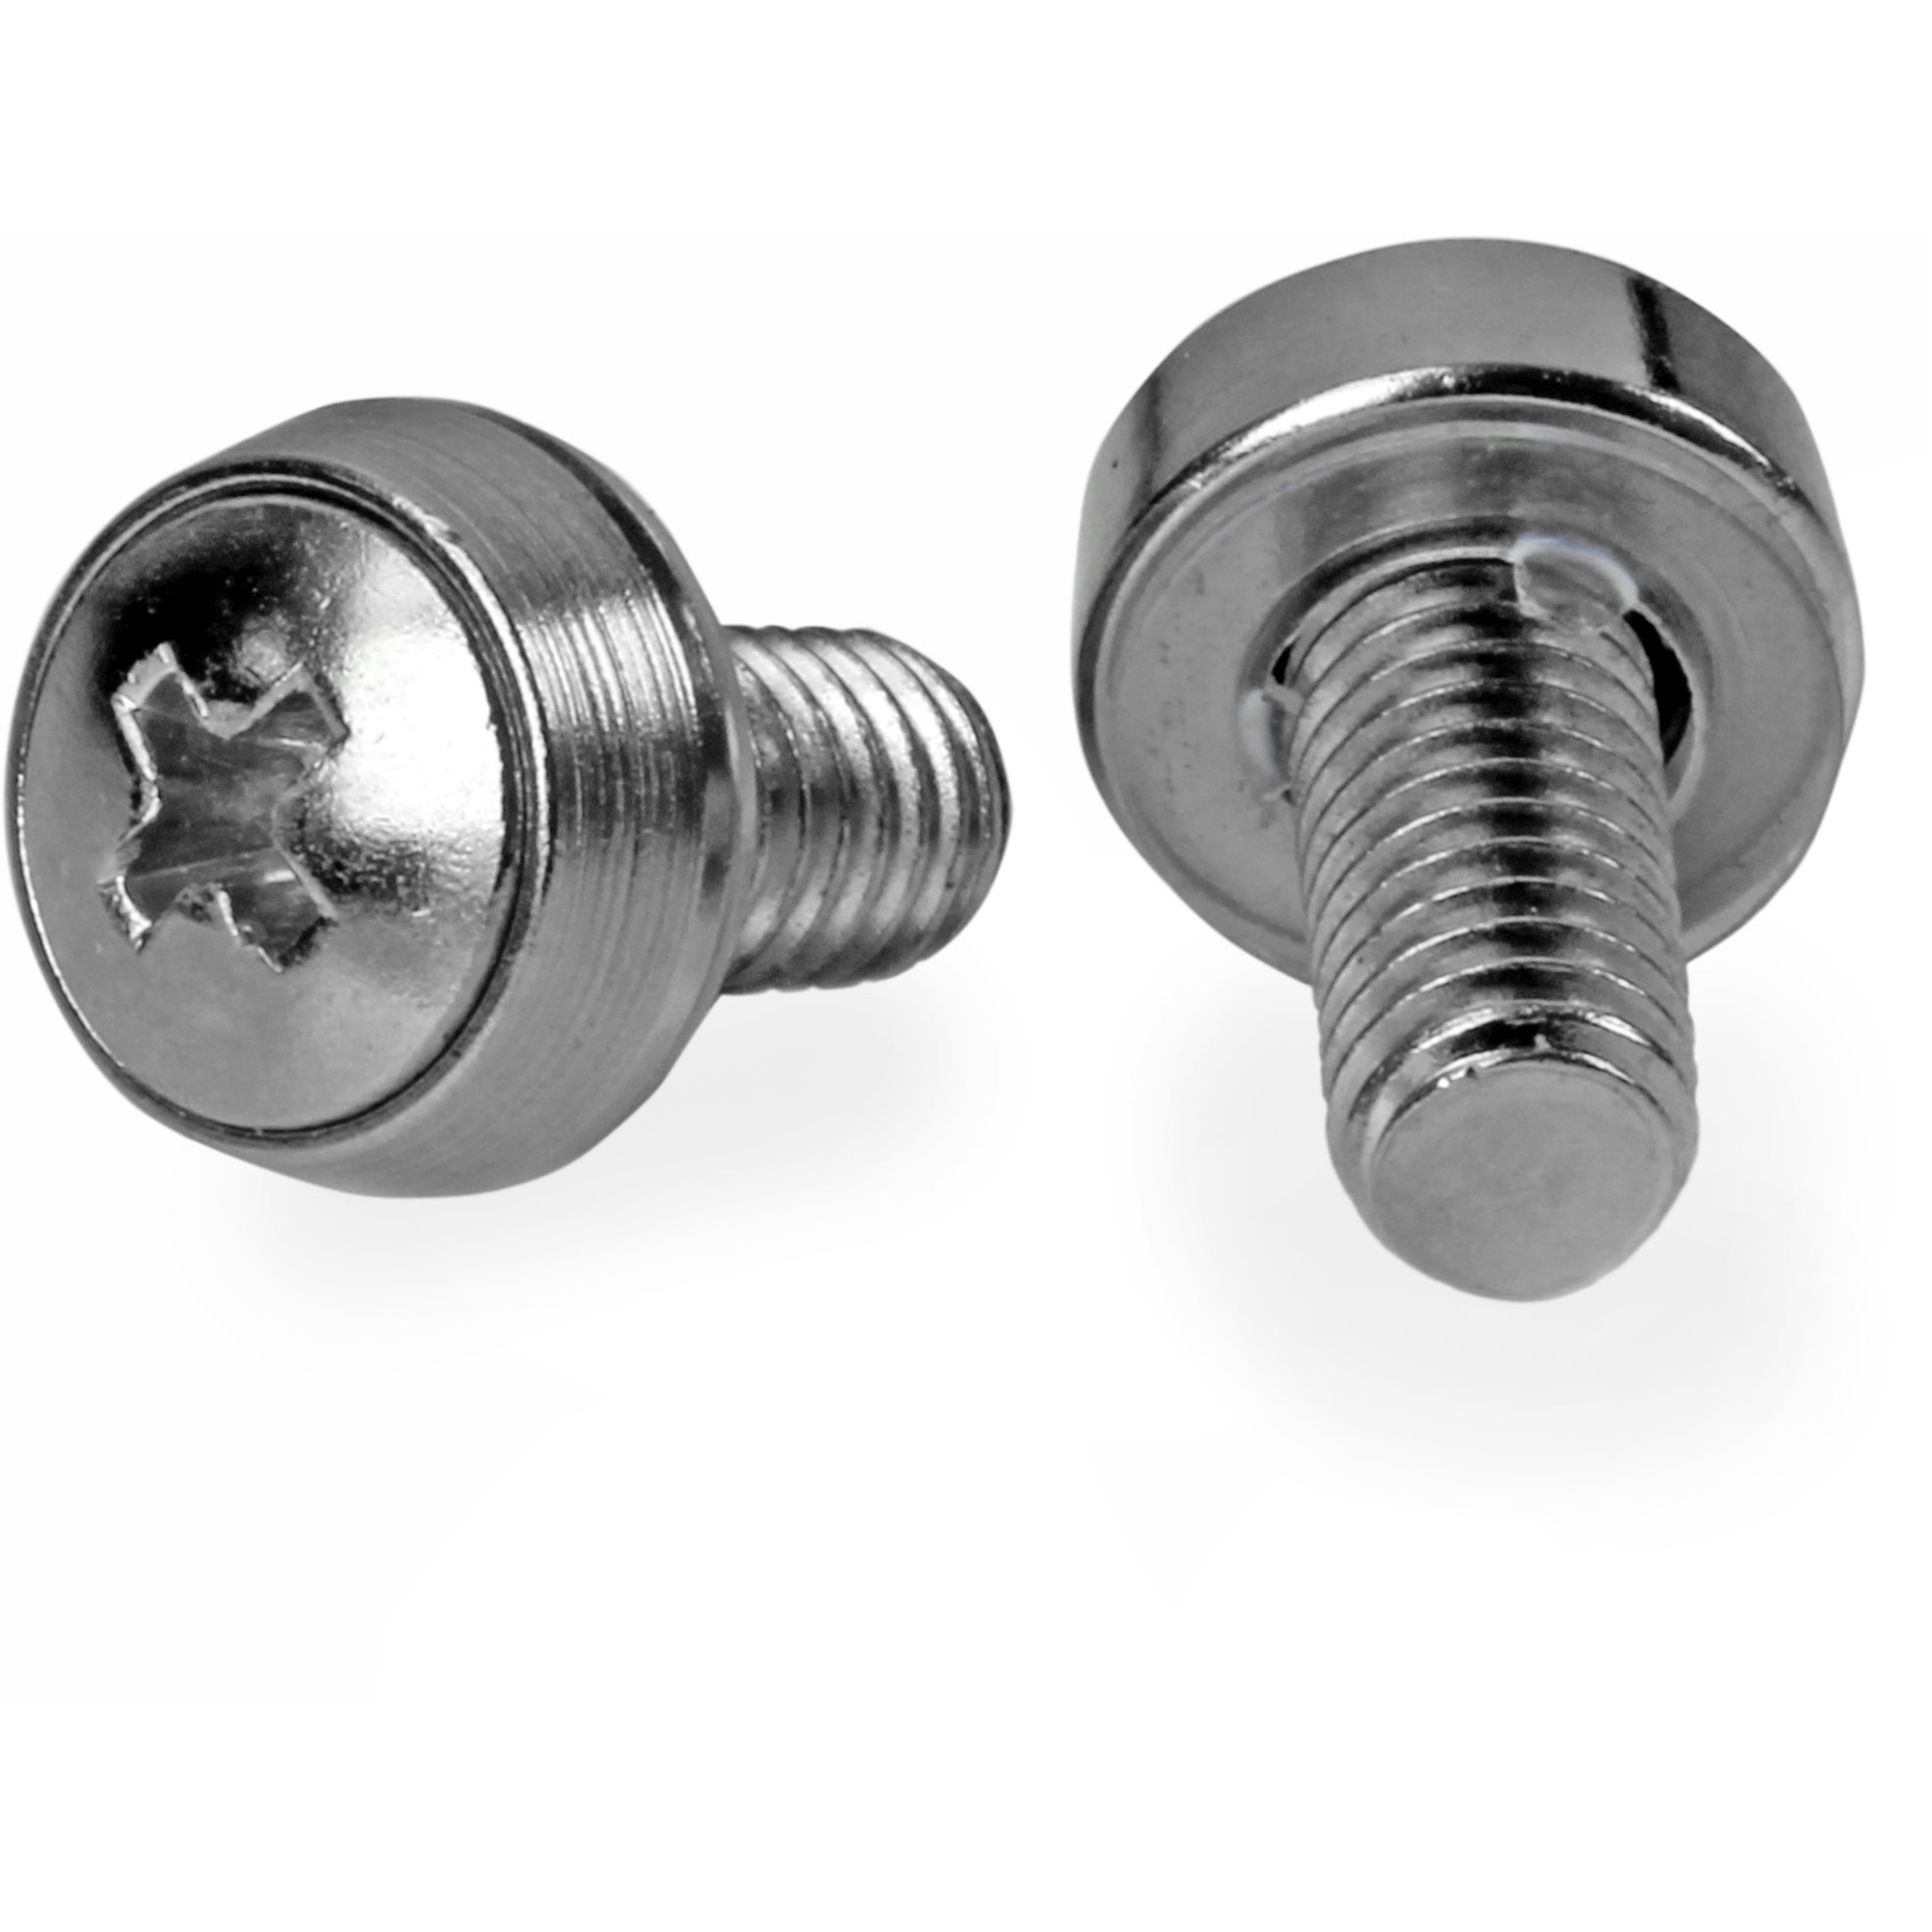 Startech .com 50 Pkg M6 Mounting Screws for Server Rack CabinetMount equipment with these high quality screwsCompatible with mountable… CABSCREWSM6